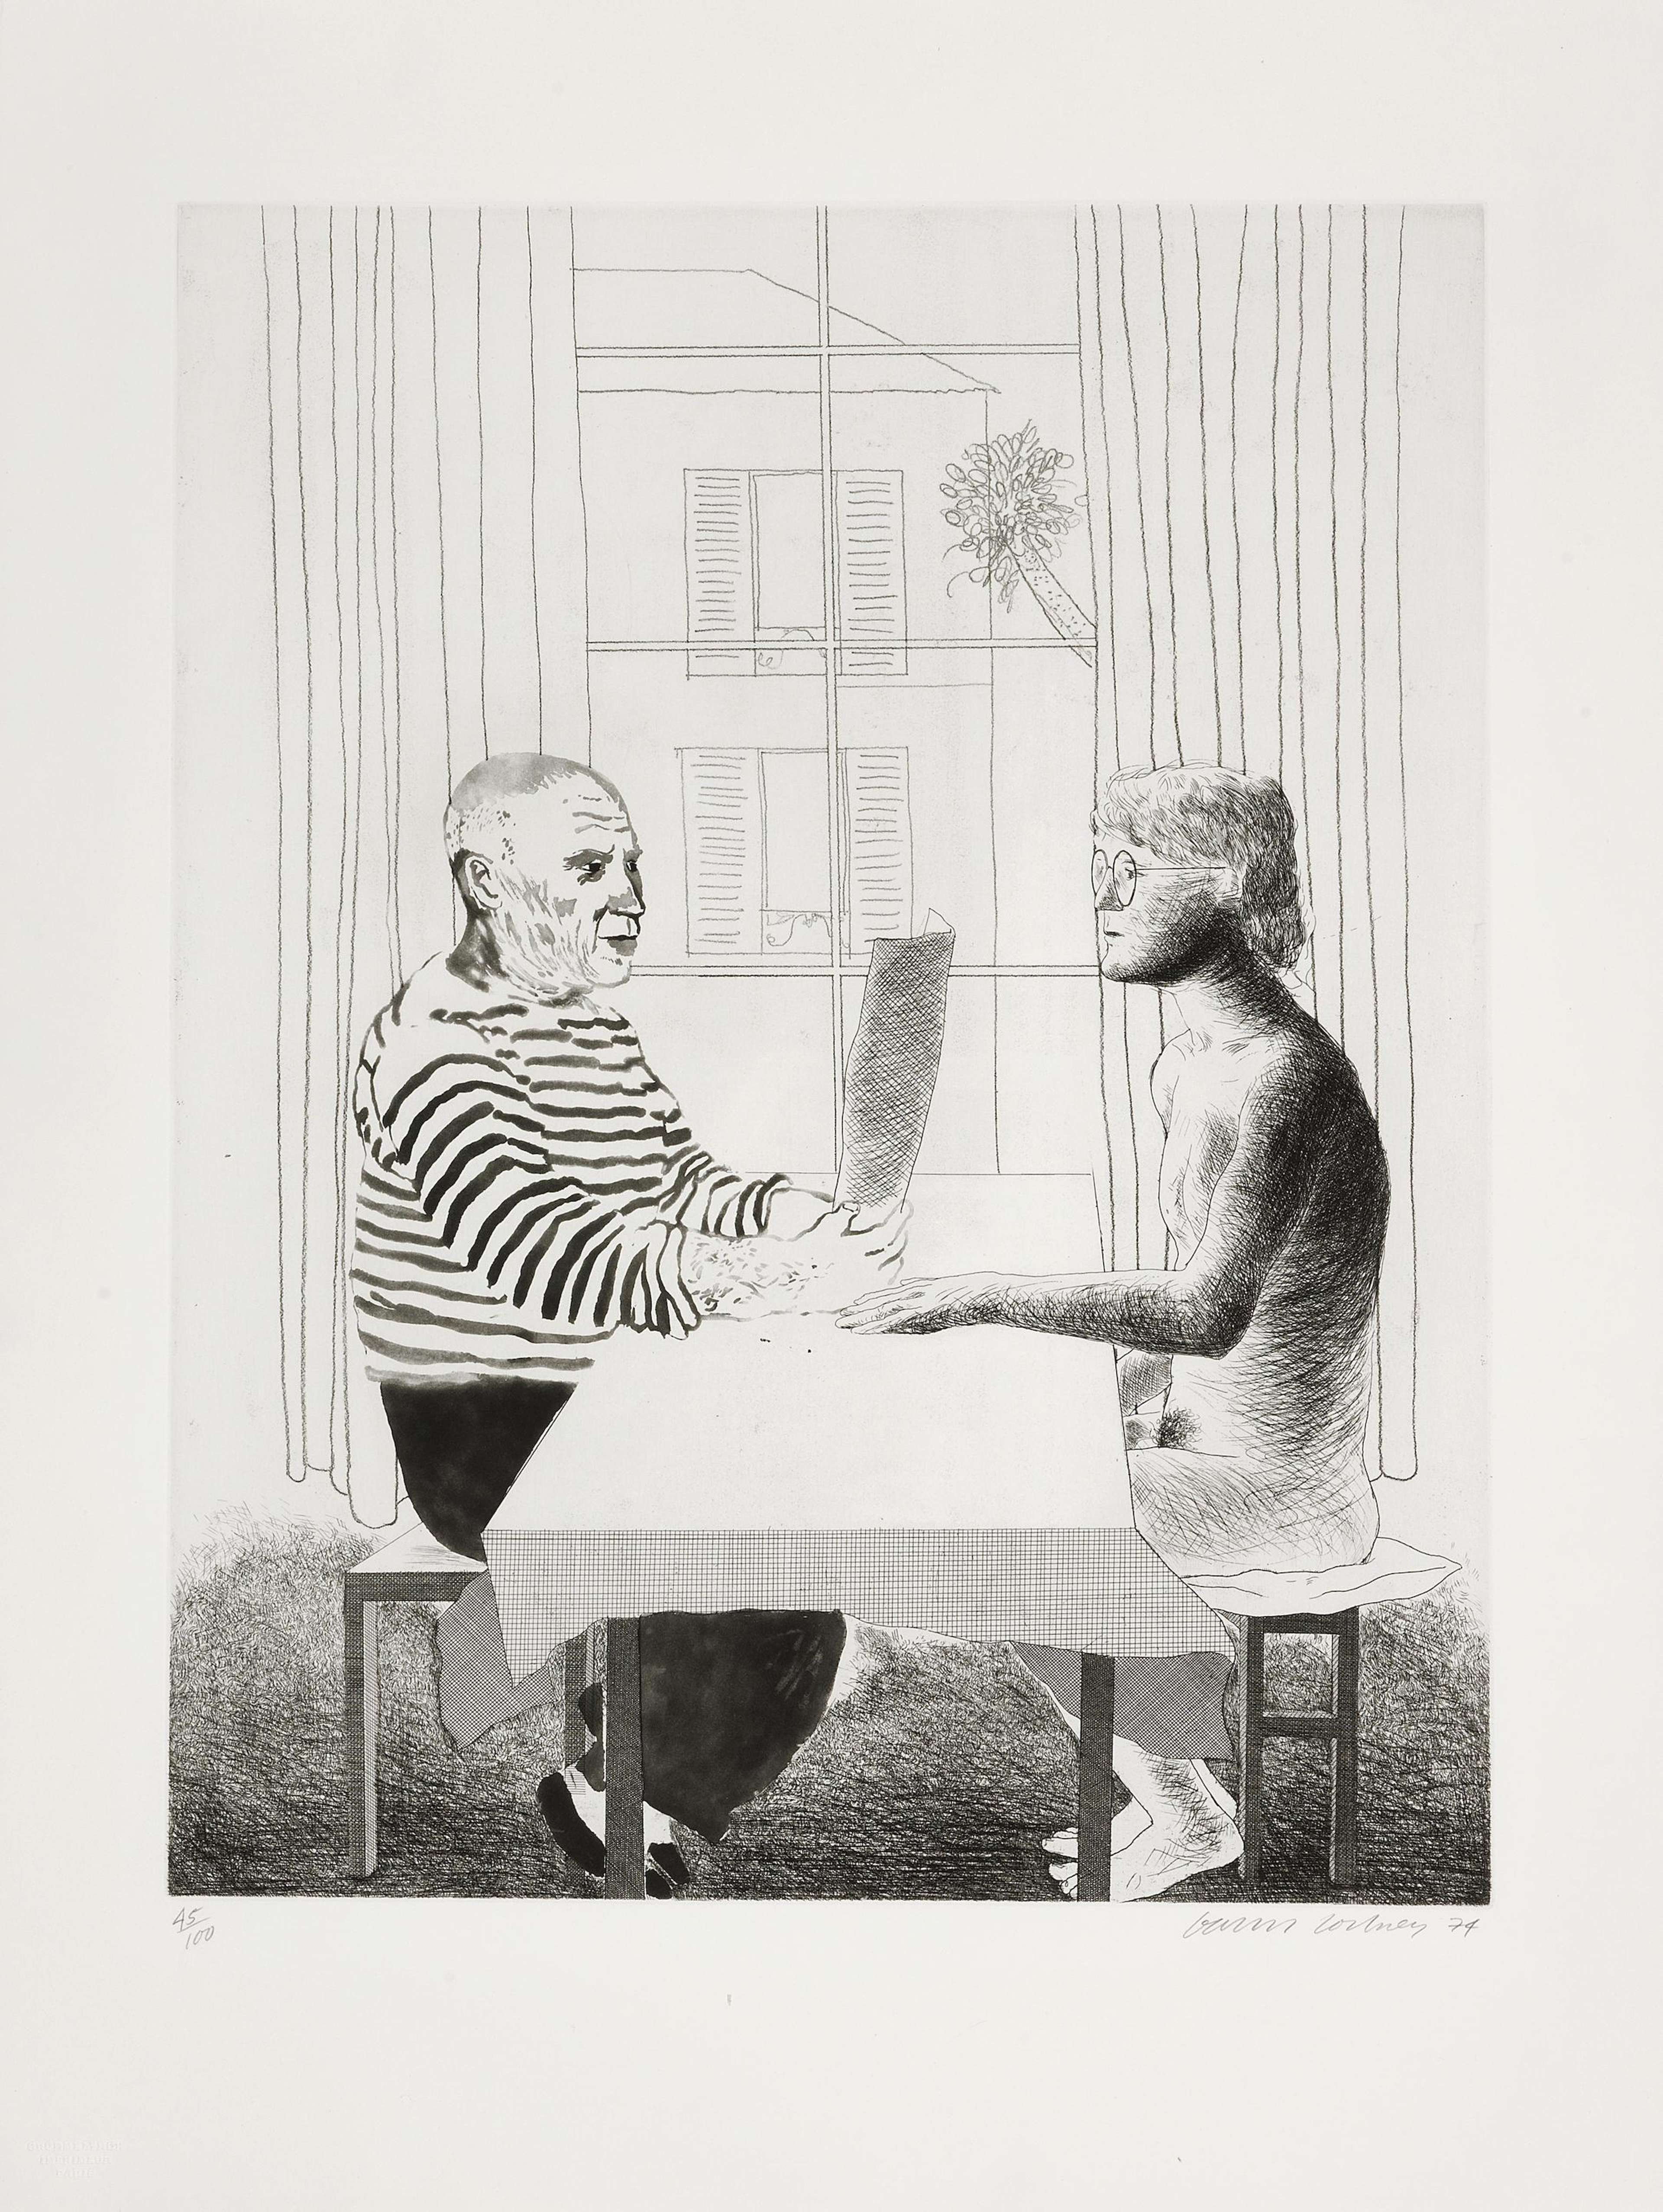 This print depicts the artist himself sat face-to-face with one of his greatest inspirations: Spanish artist Pablo Picasso. He is shown nude while Picasso is fully clothed in his signature breton shirt.